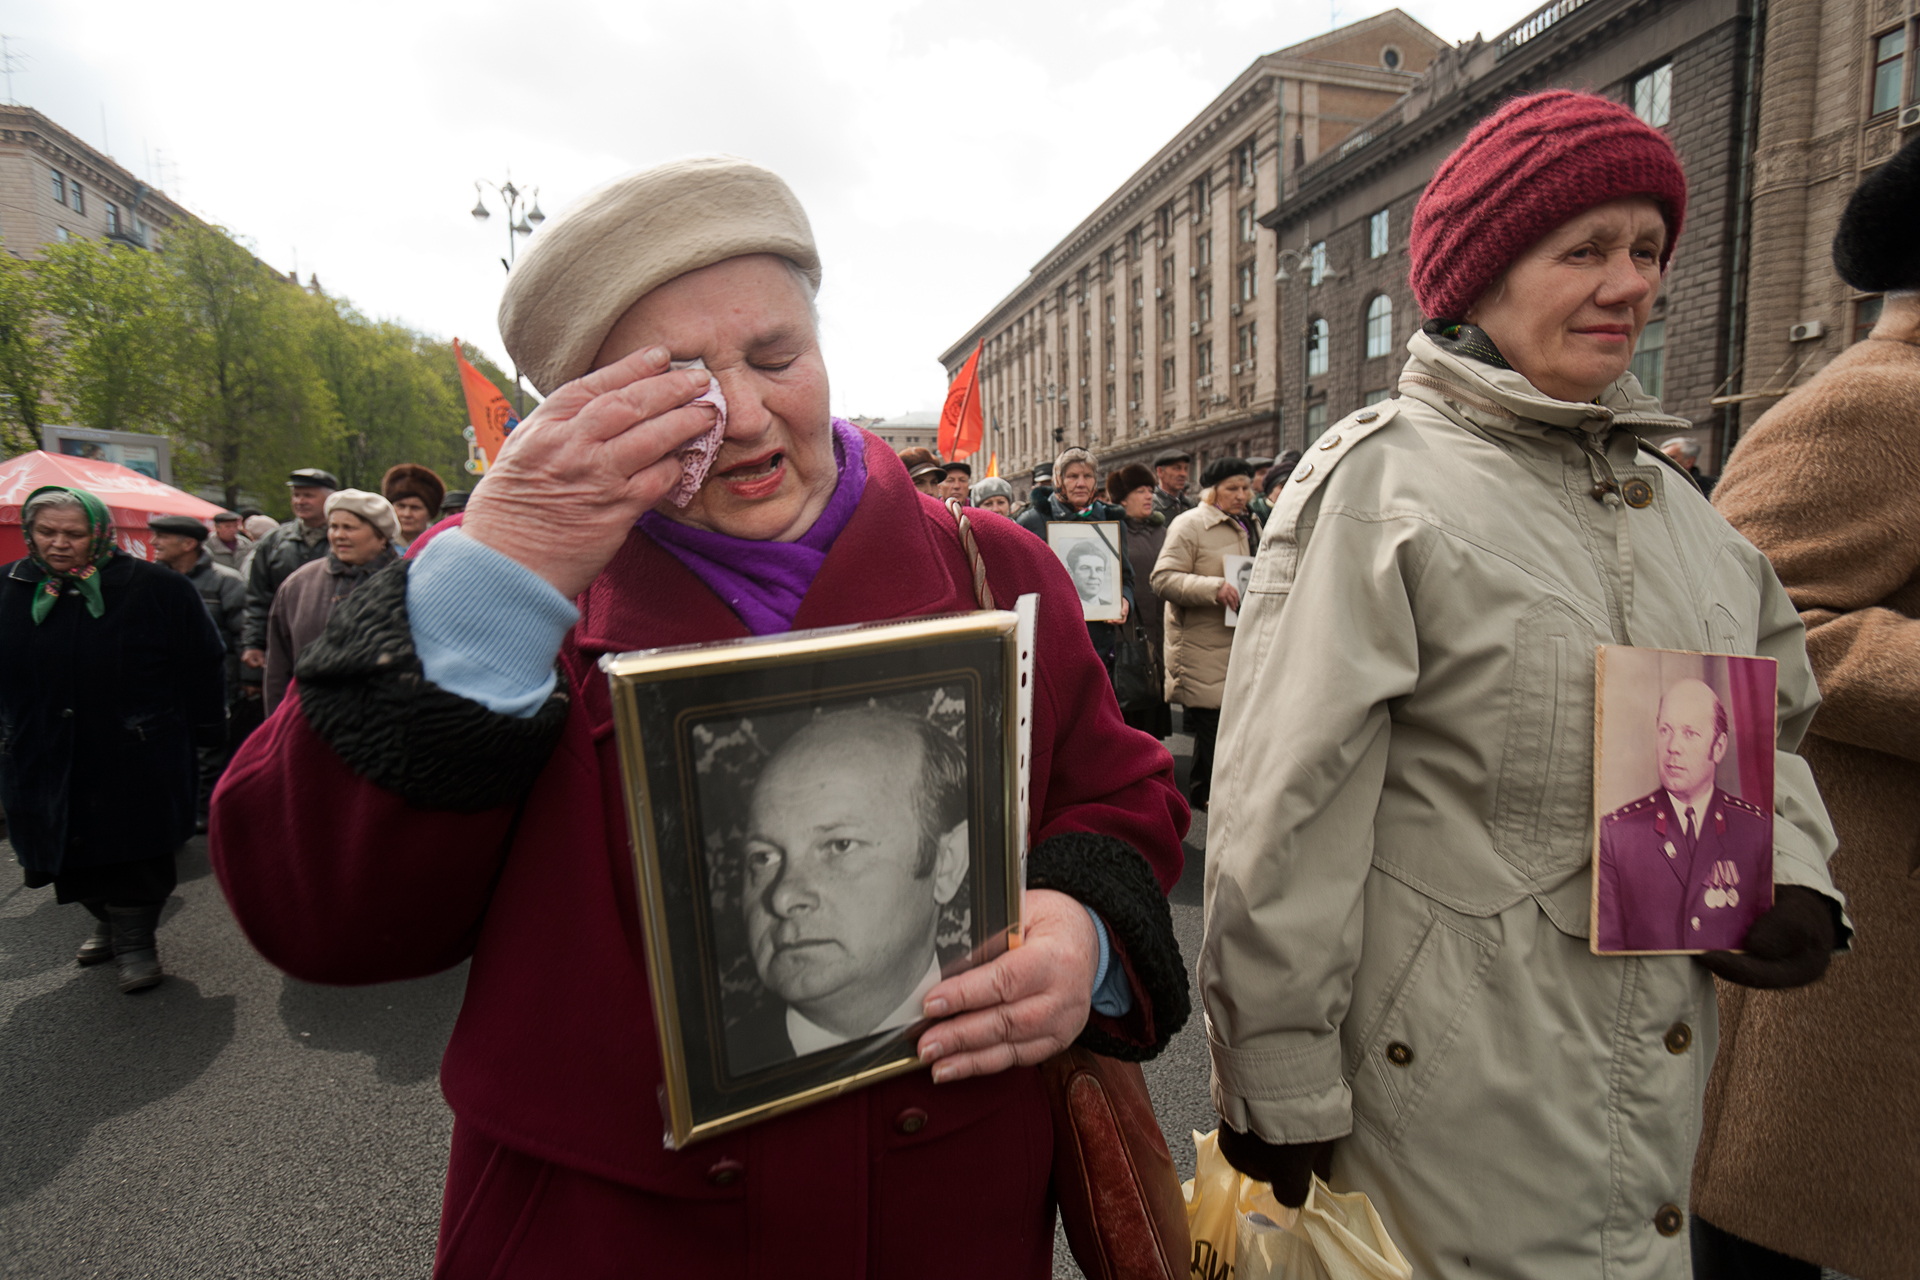  A group of women known as Chernobyl Widows carry photographs of their deceased loved ones during a 5,000 strong demonstration in Kiev on the anniversary of the Chernobyl accident.  Kiev, Ukraine  